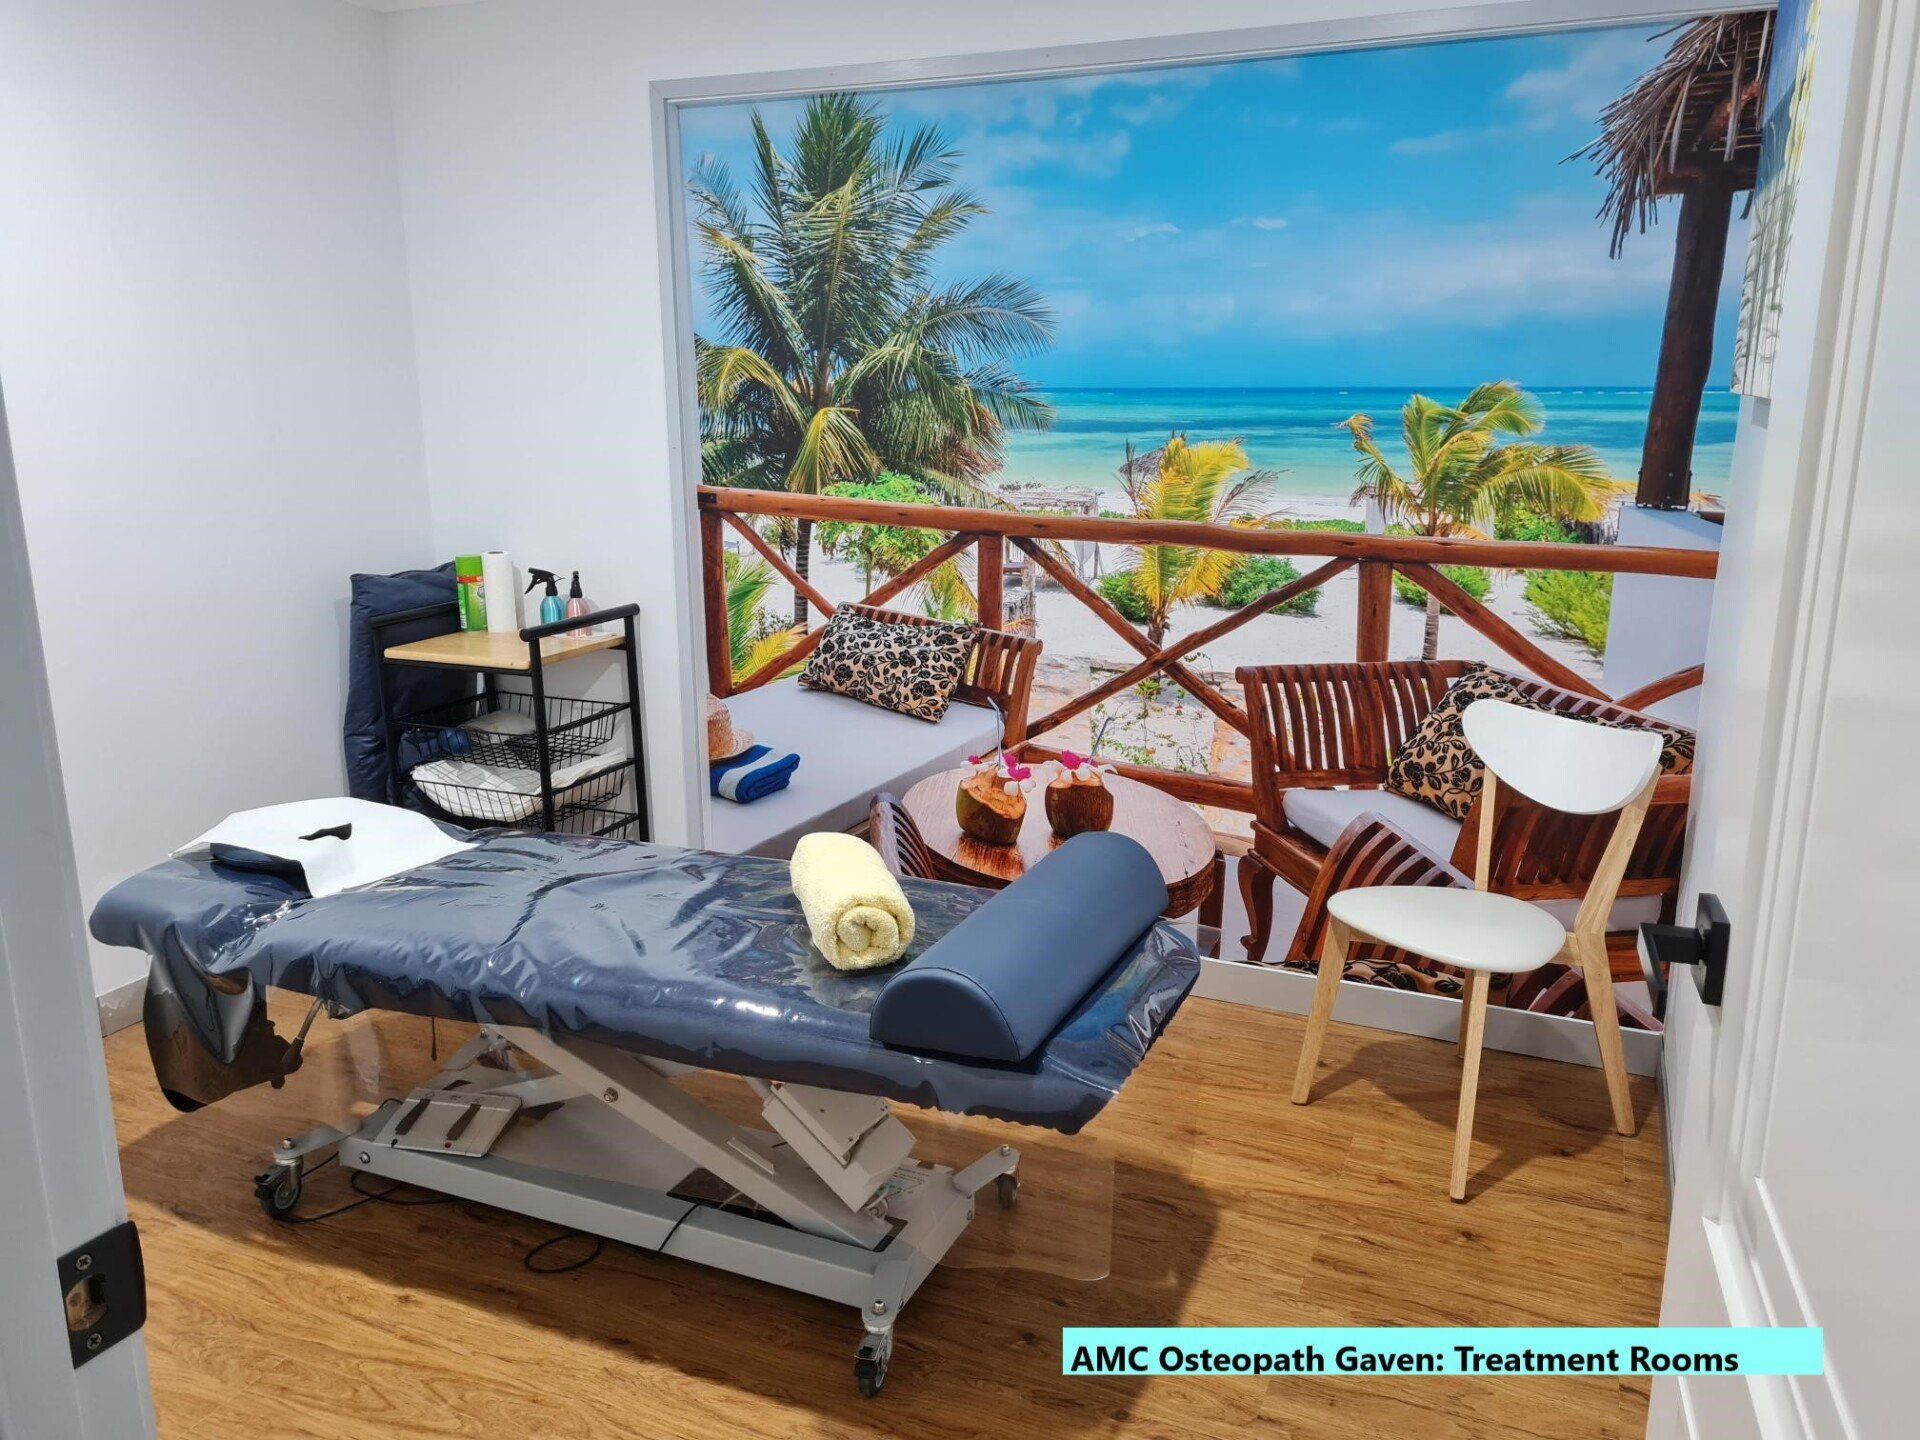 Osteopathic Clinic treatment room with tropical background scene at Gaven on the Gold Coast